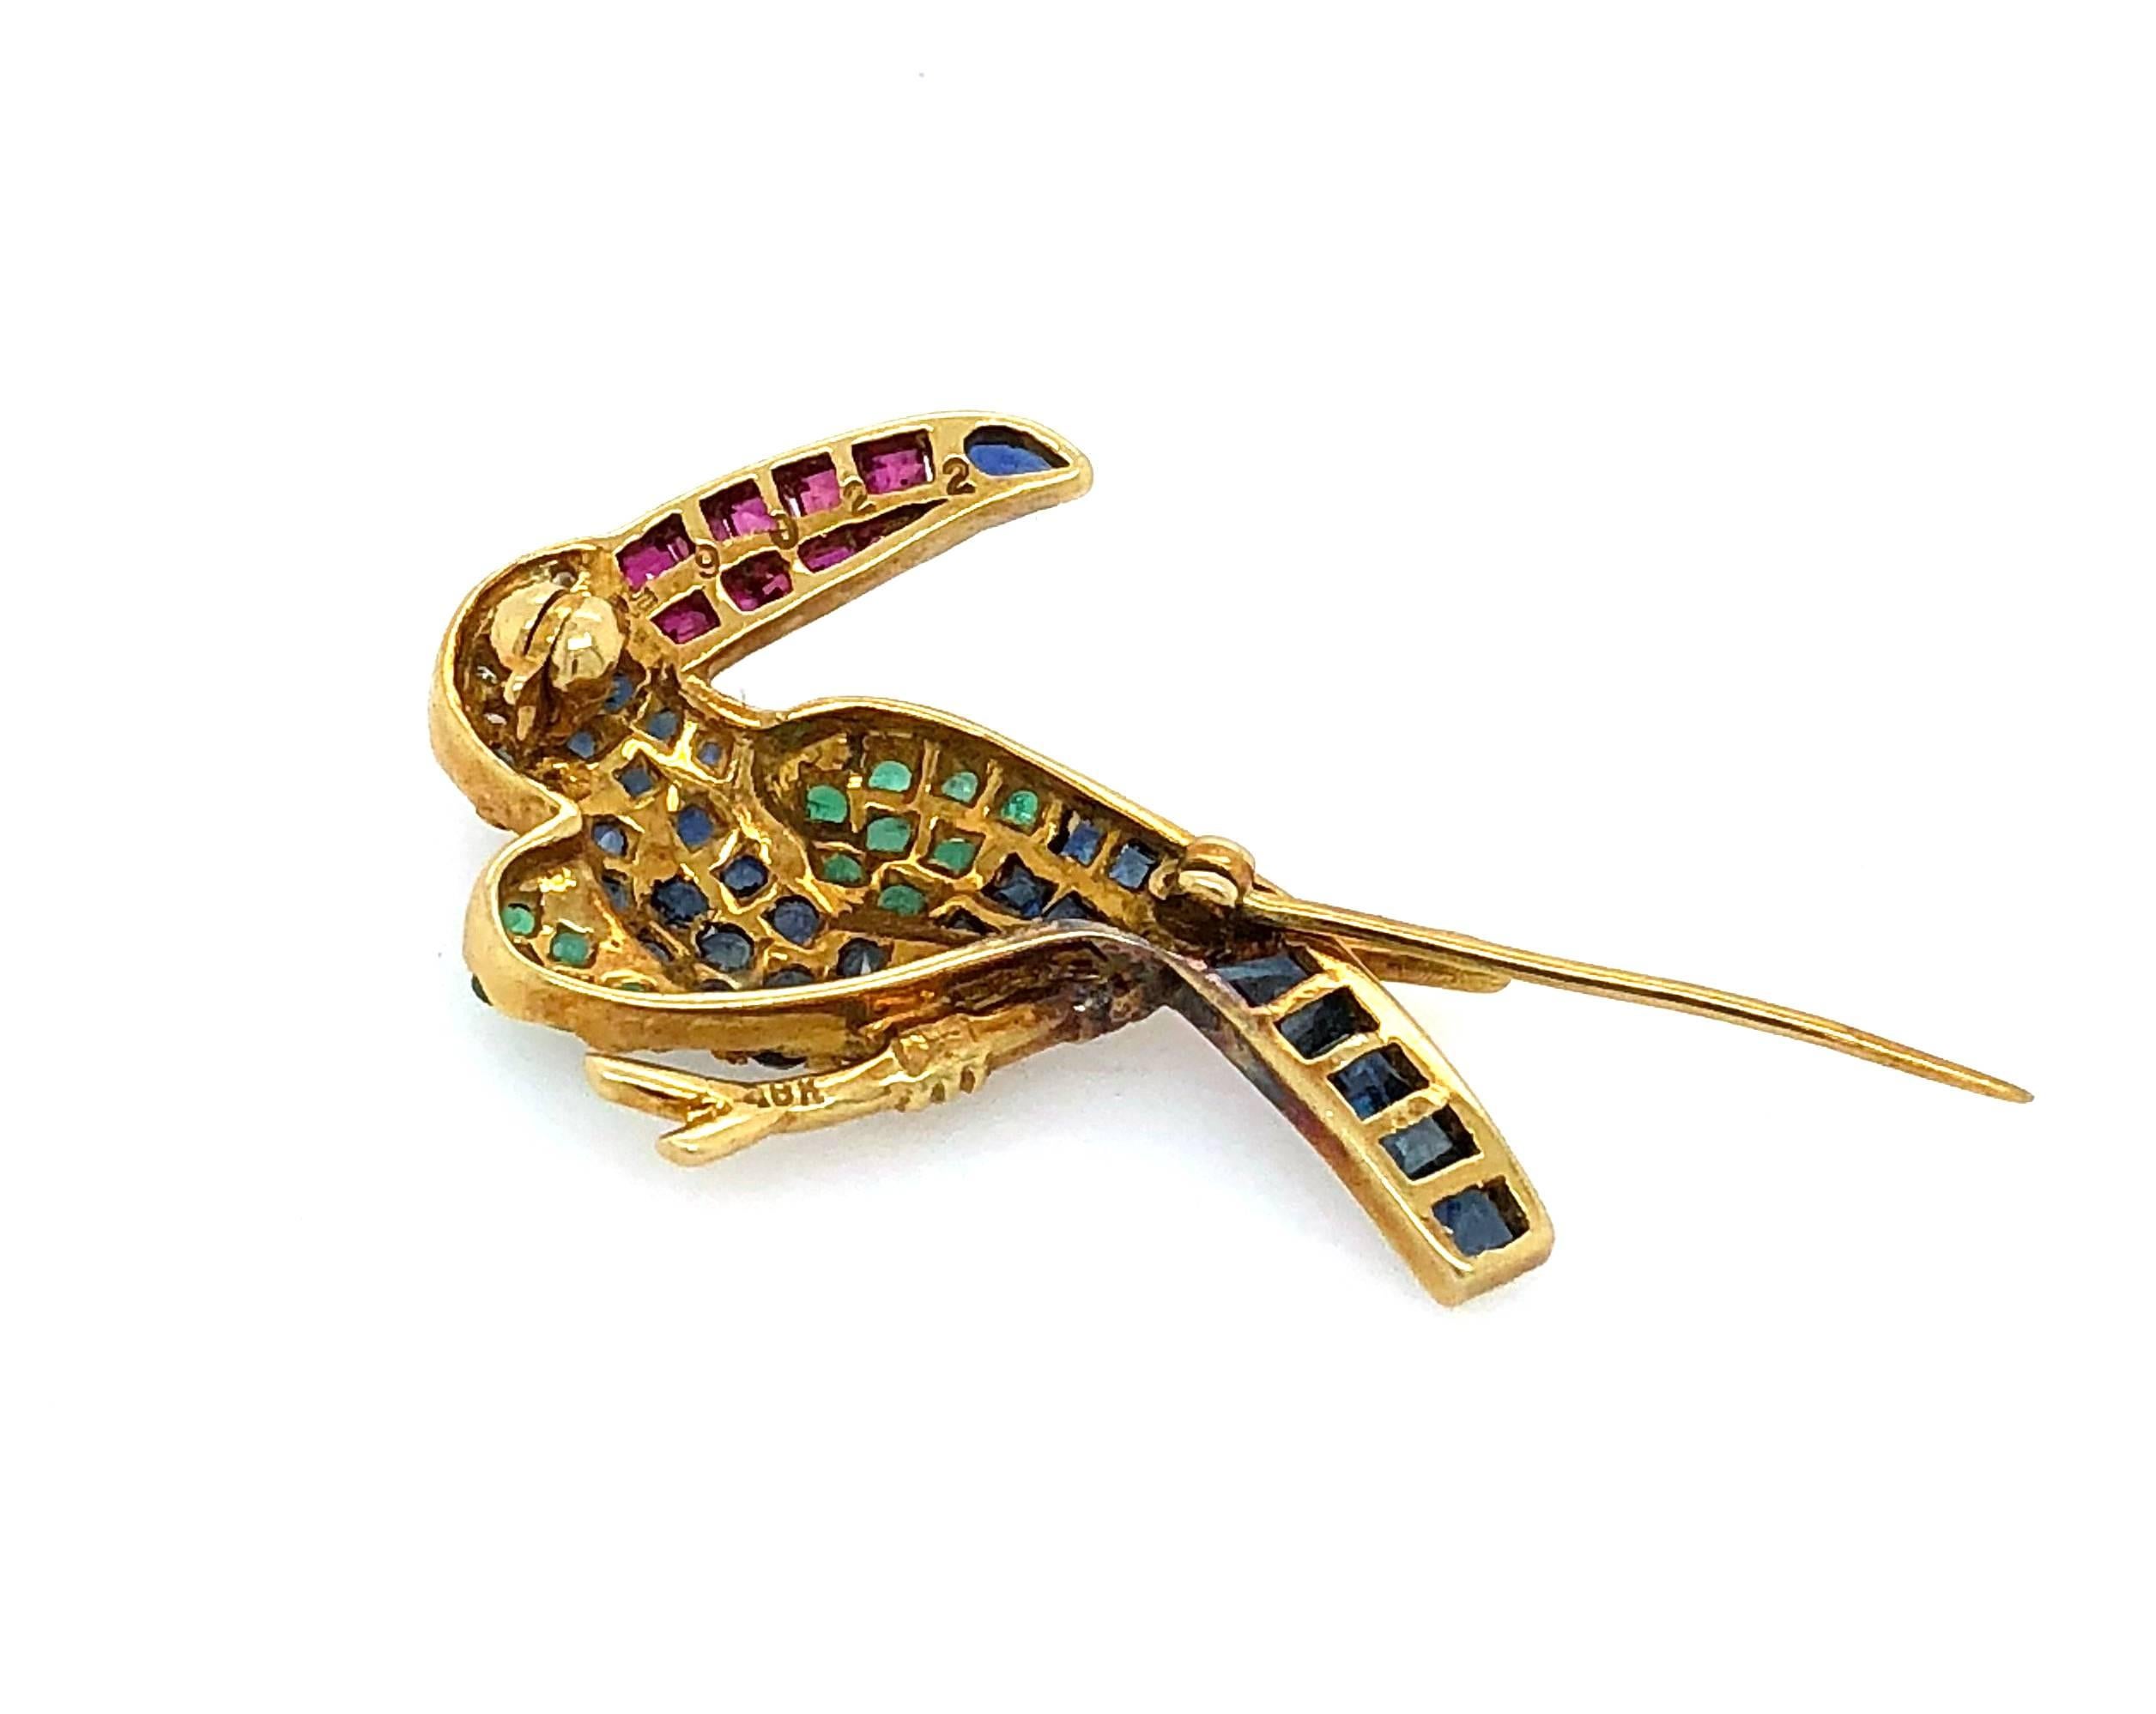 This beautiful brooch features a Toucan bird with multi-colour stones in 18K yellow gold setting. The beak is made of 10 Rubies of 0.32 carats with 5 Round Brilliant diamonds and a Sapphire around the face. There are 13 natural emeralds of 0.26